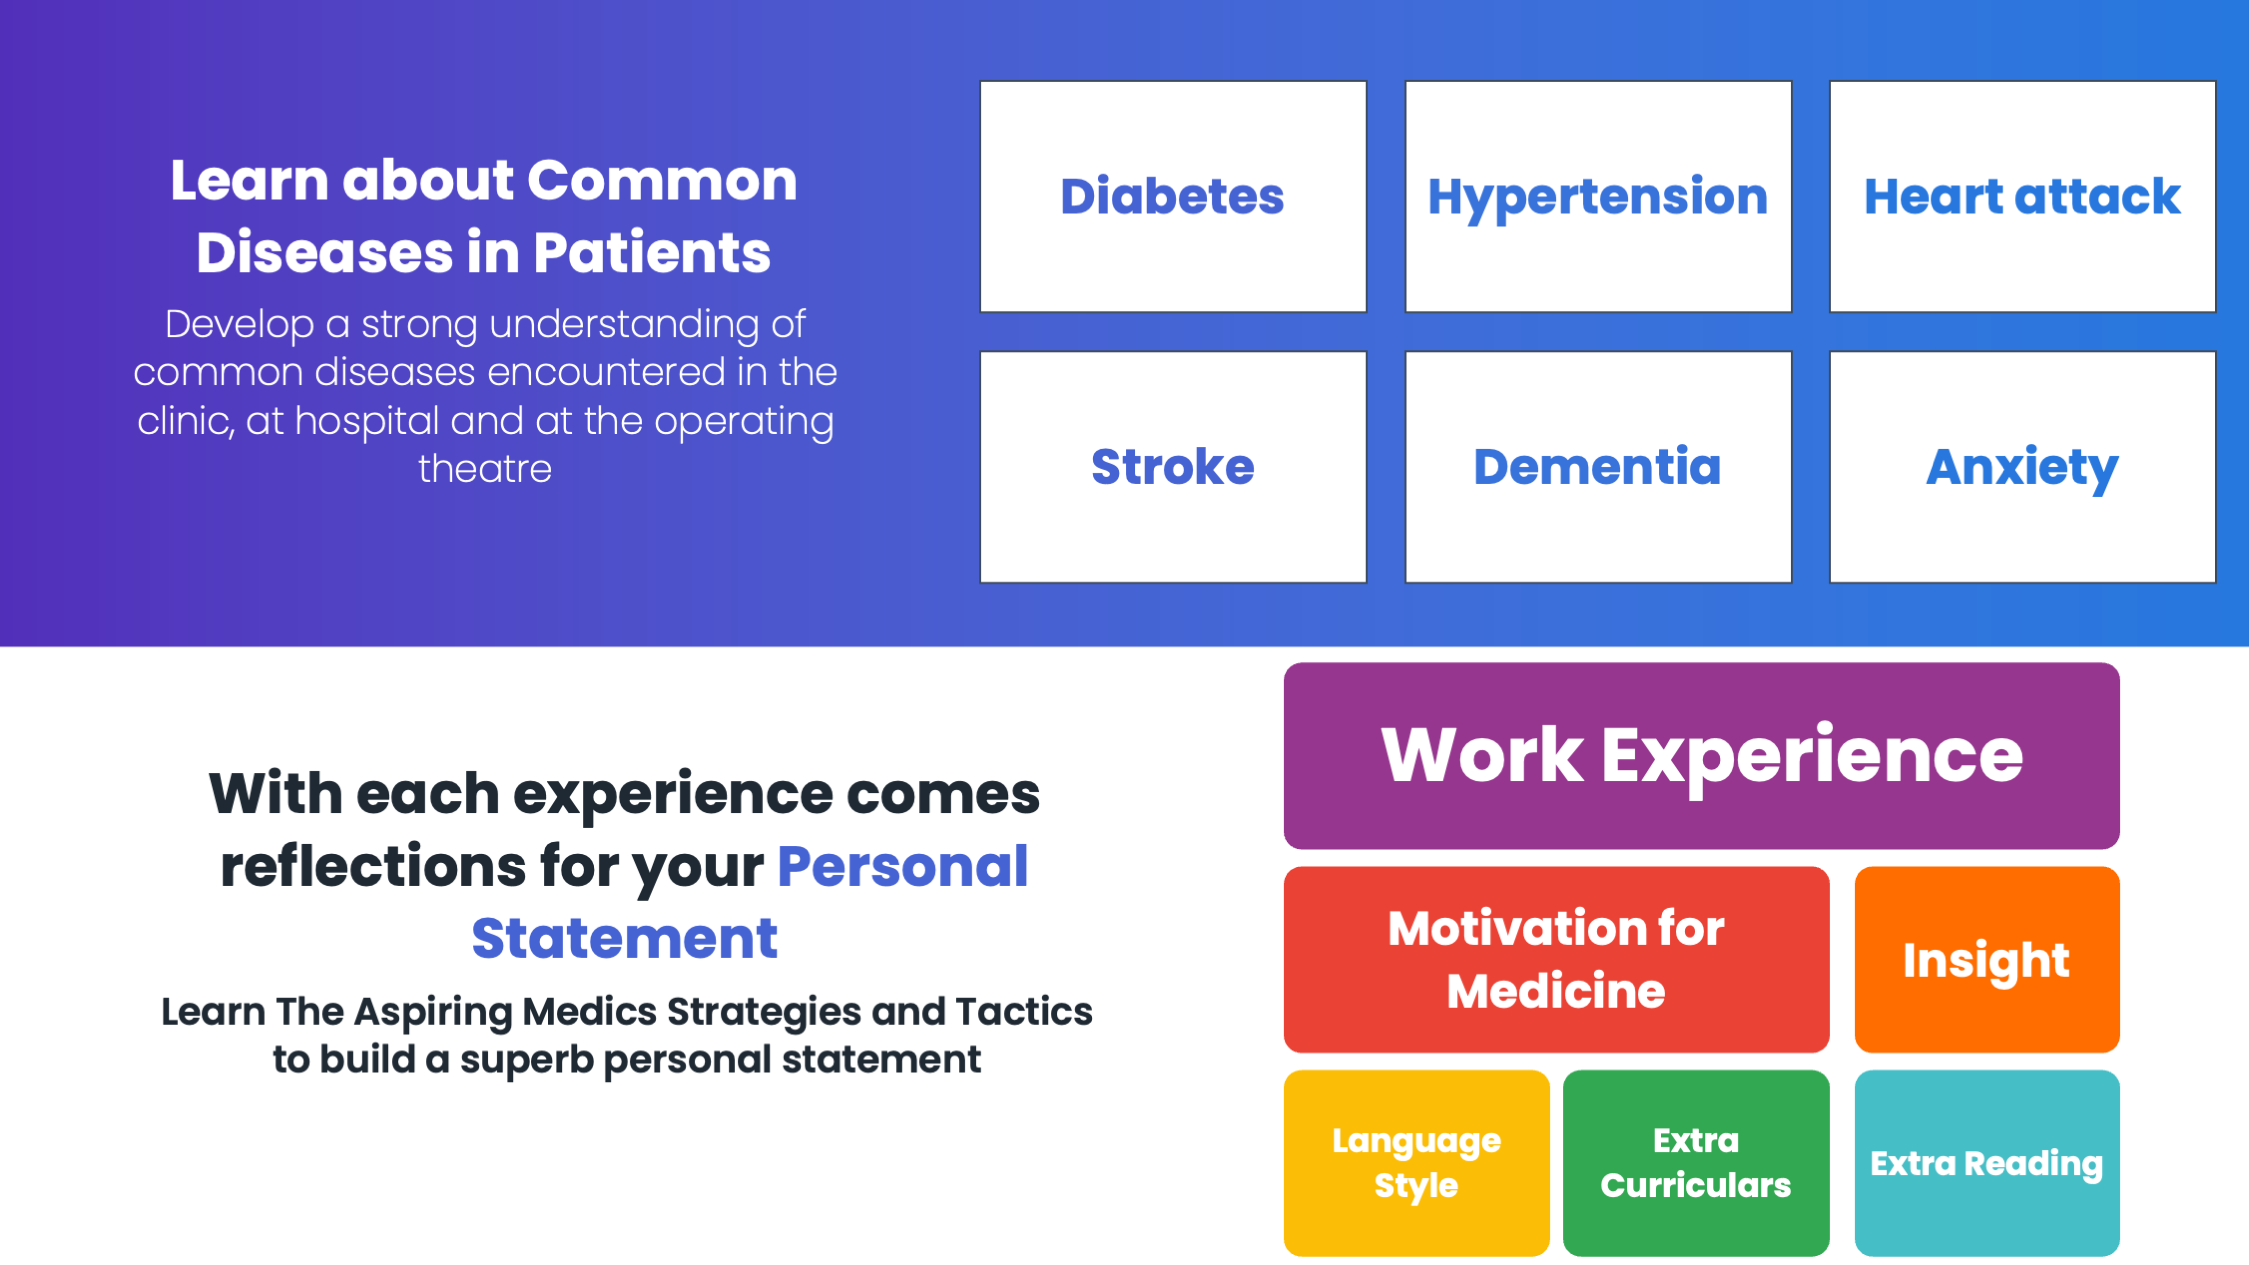 Learn about Common Diseases in Patients. With each experience comes reflections for your Personal Statement 